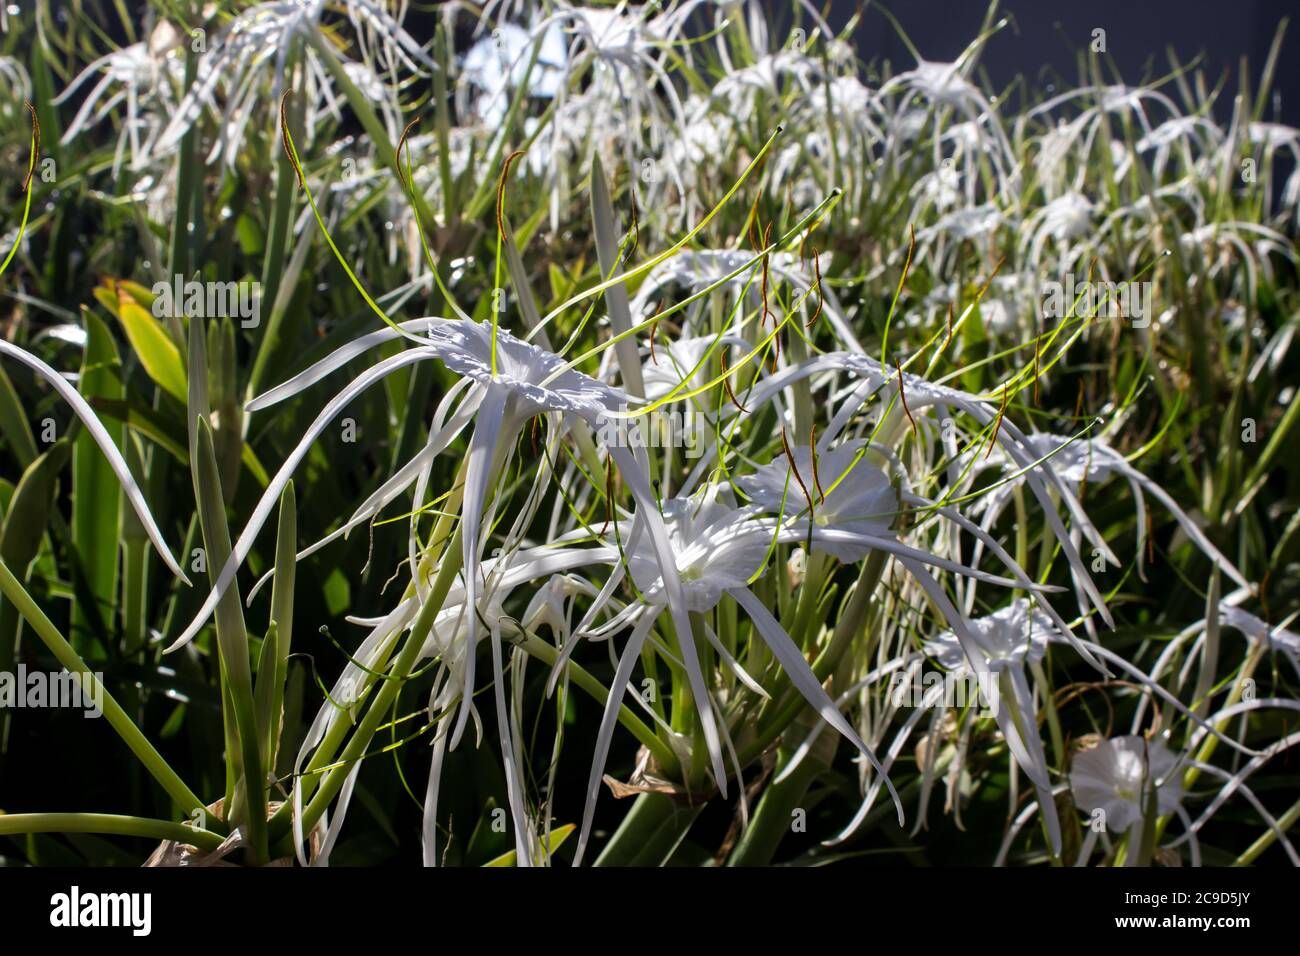 A mass of Beach spider lilies, Hymenocallis littoralis, in full bloom, photographed in a garden in Maputo, Mozambique Stock Photo